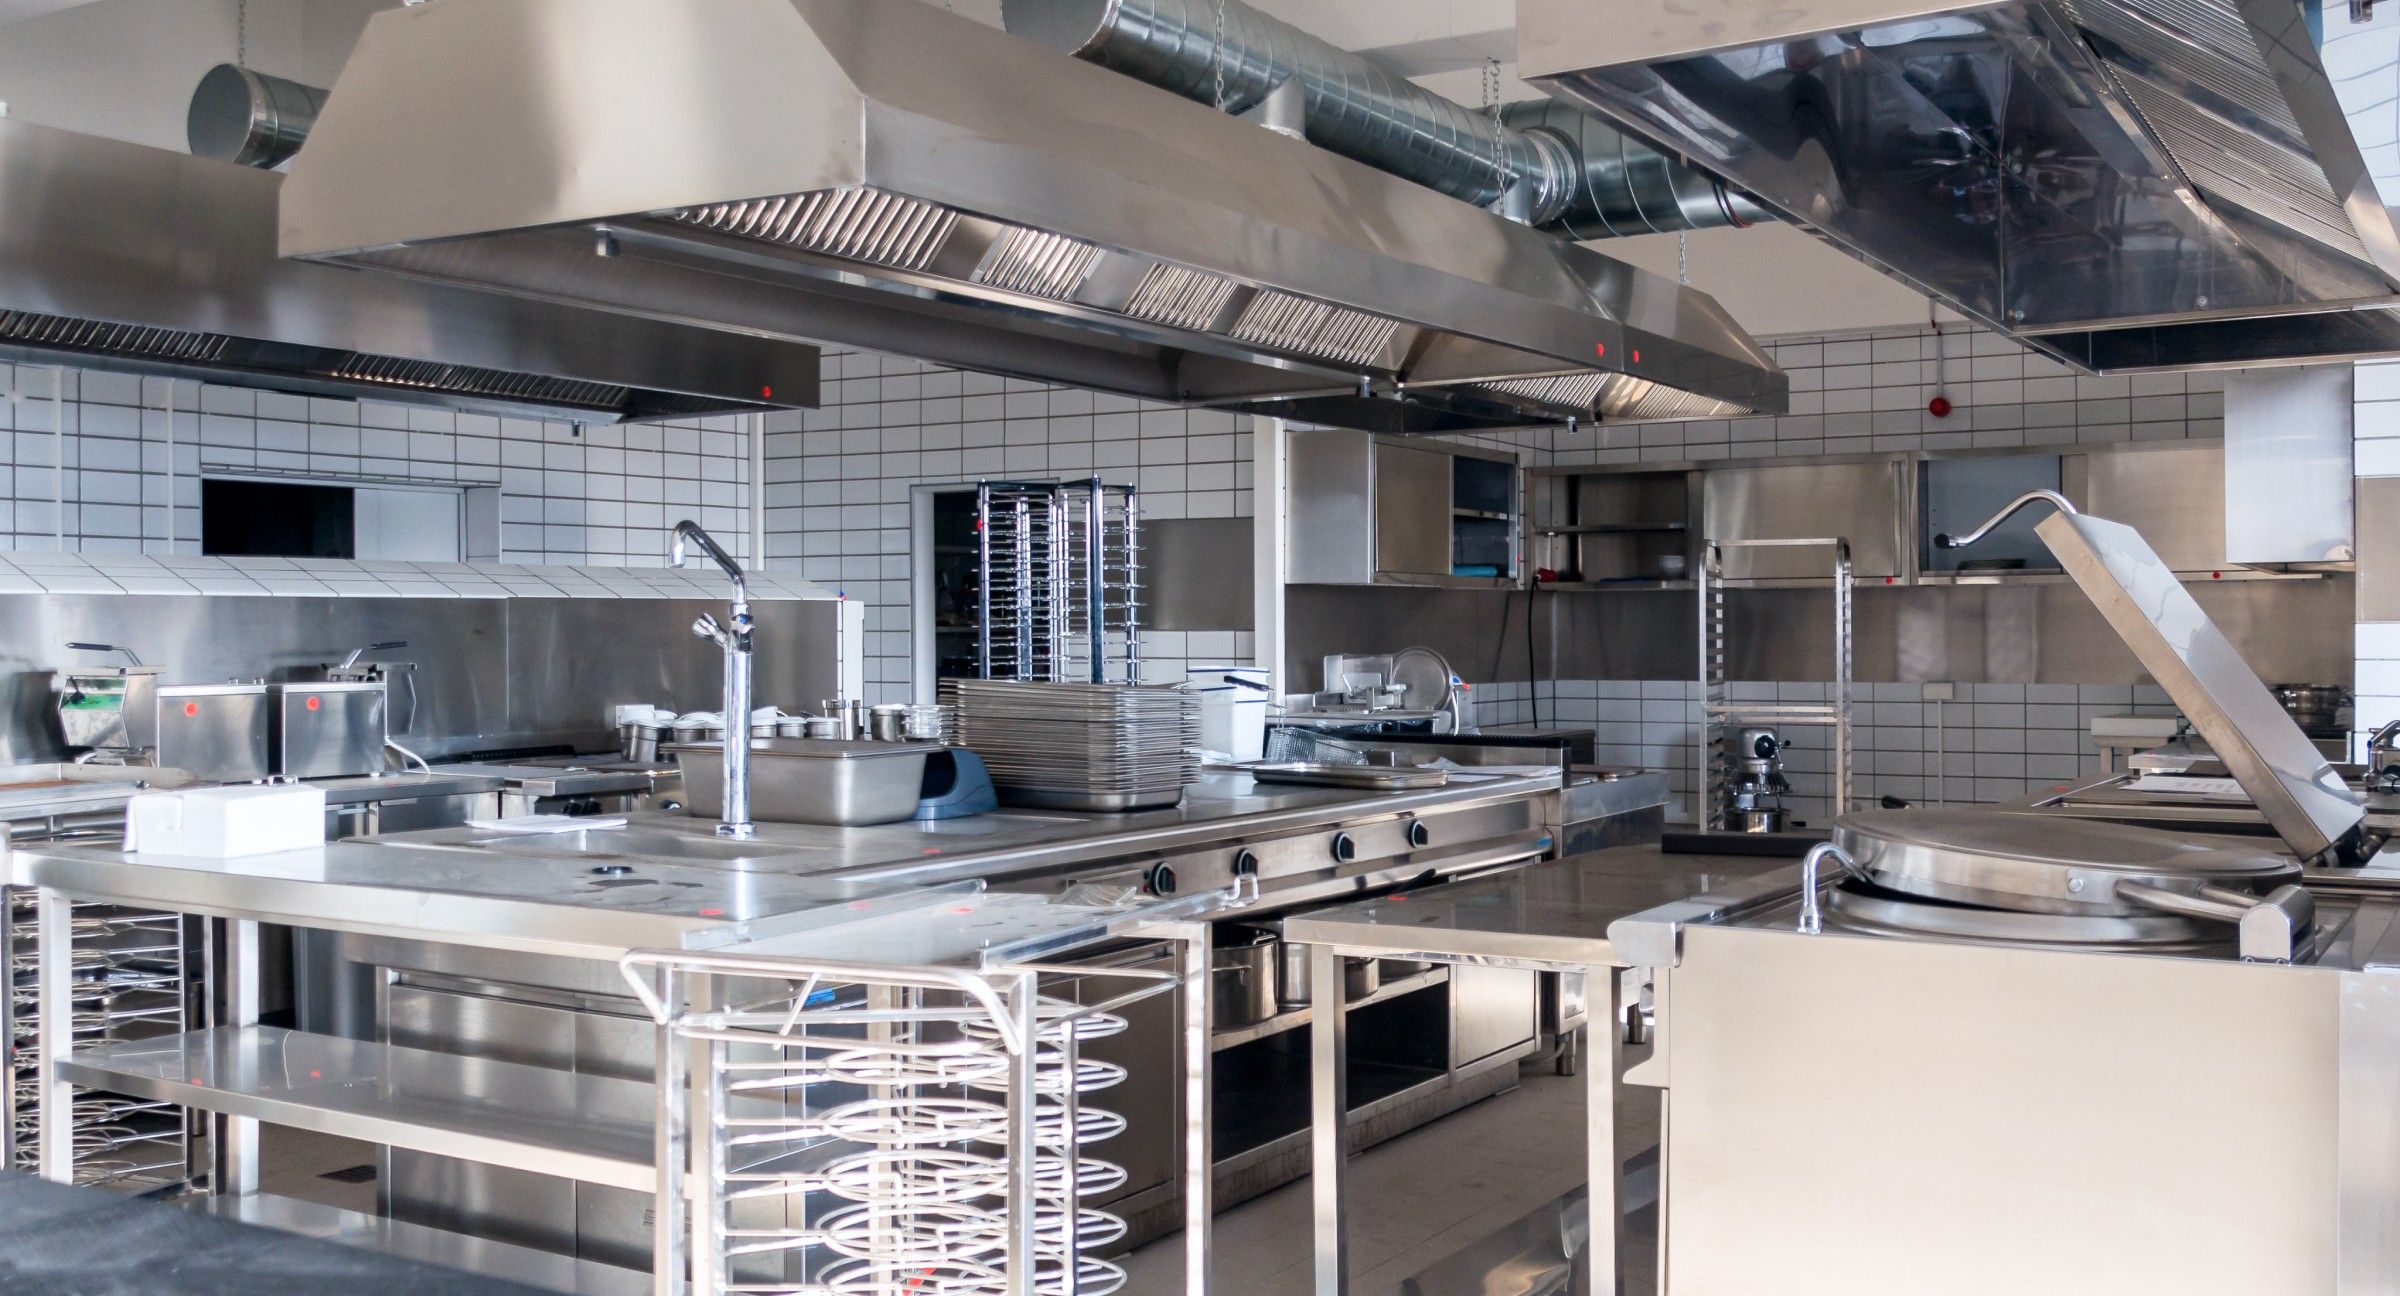 There are many steps to cleaning a commercial kitchen thoroughly. Read on to learn the various aspects of keeping a commercial kitchen as clean as possible.